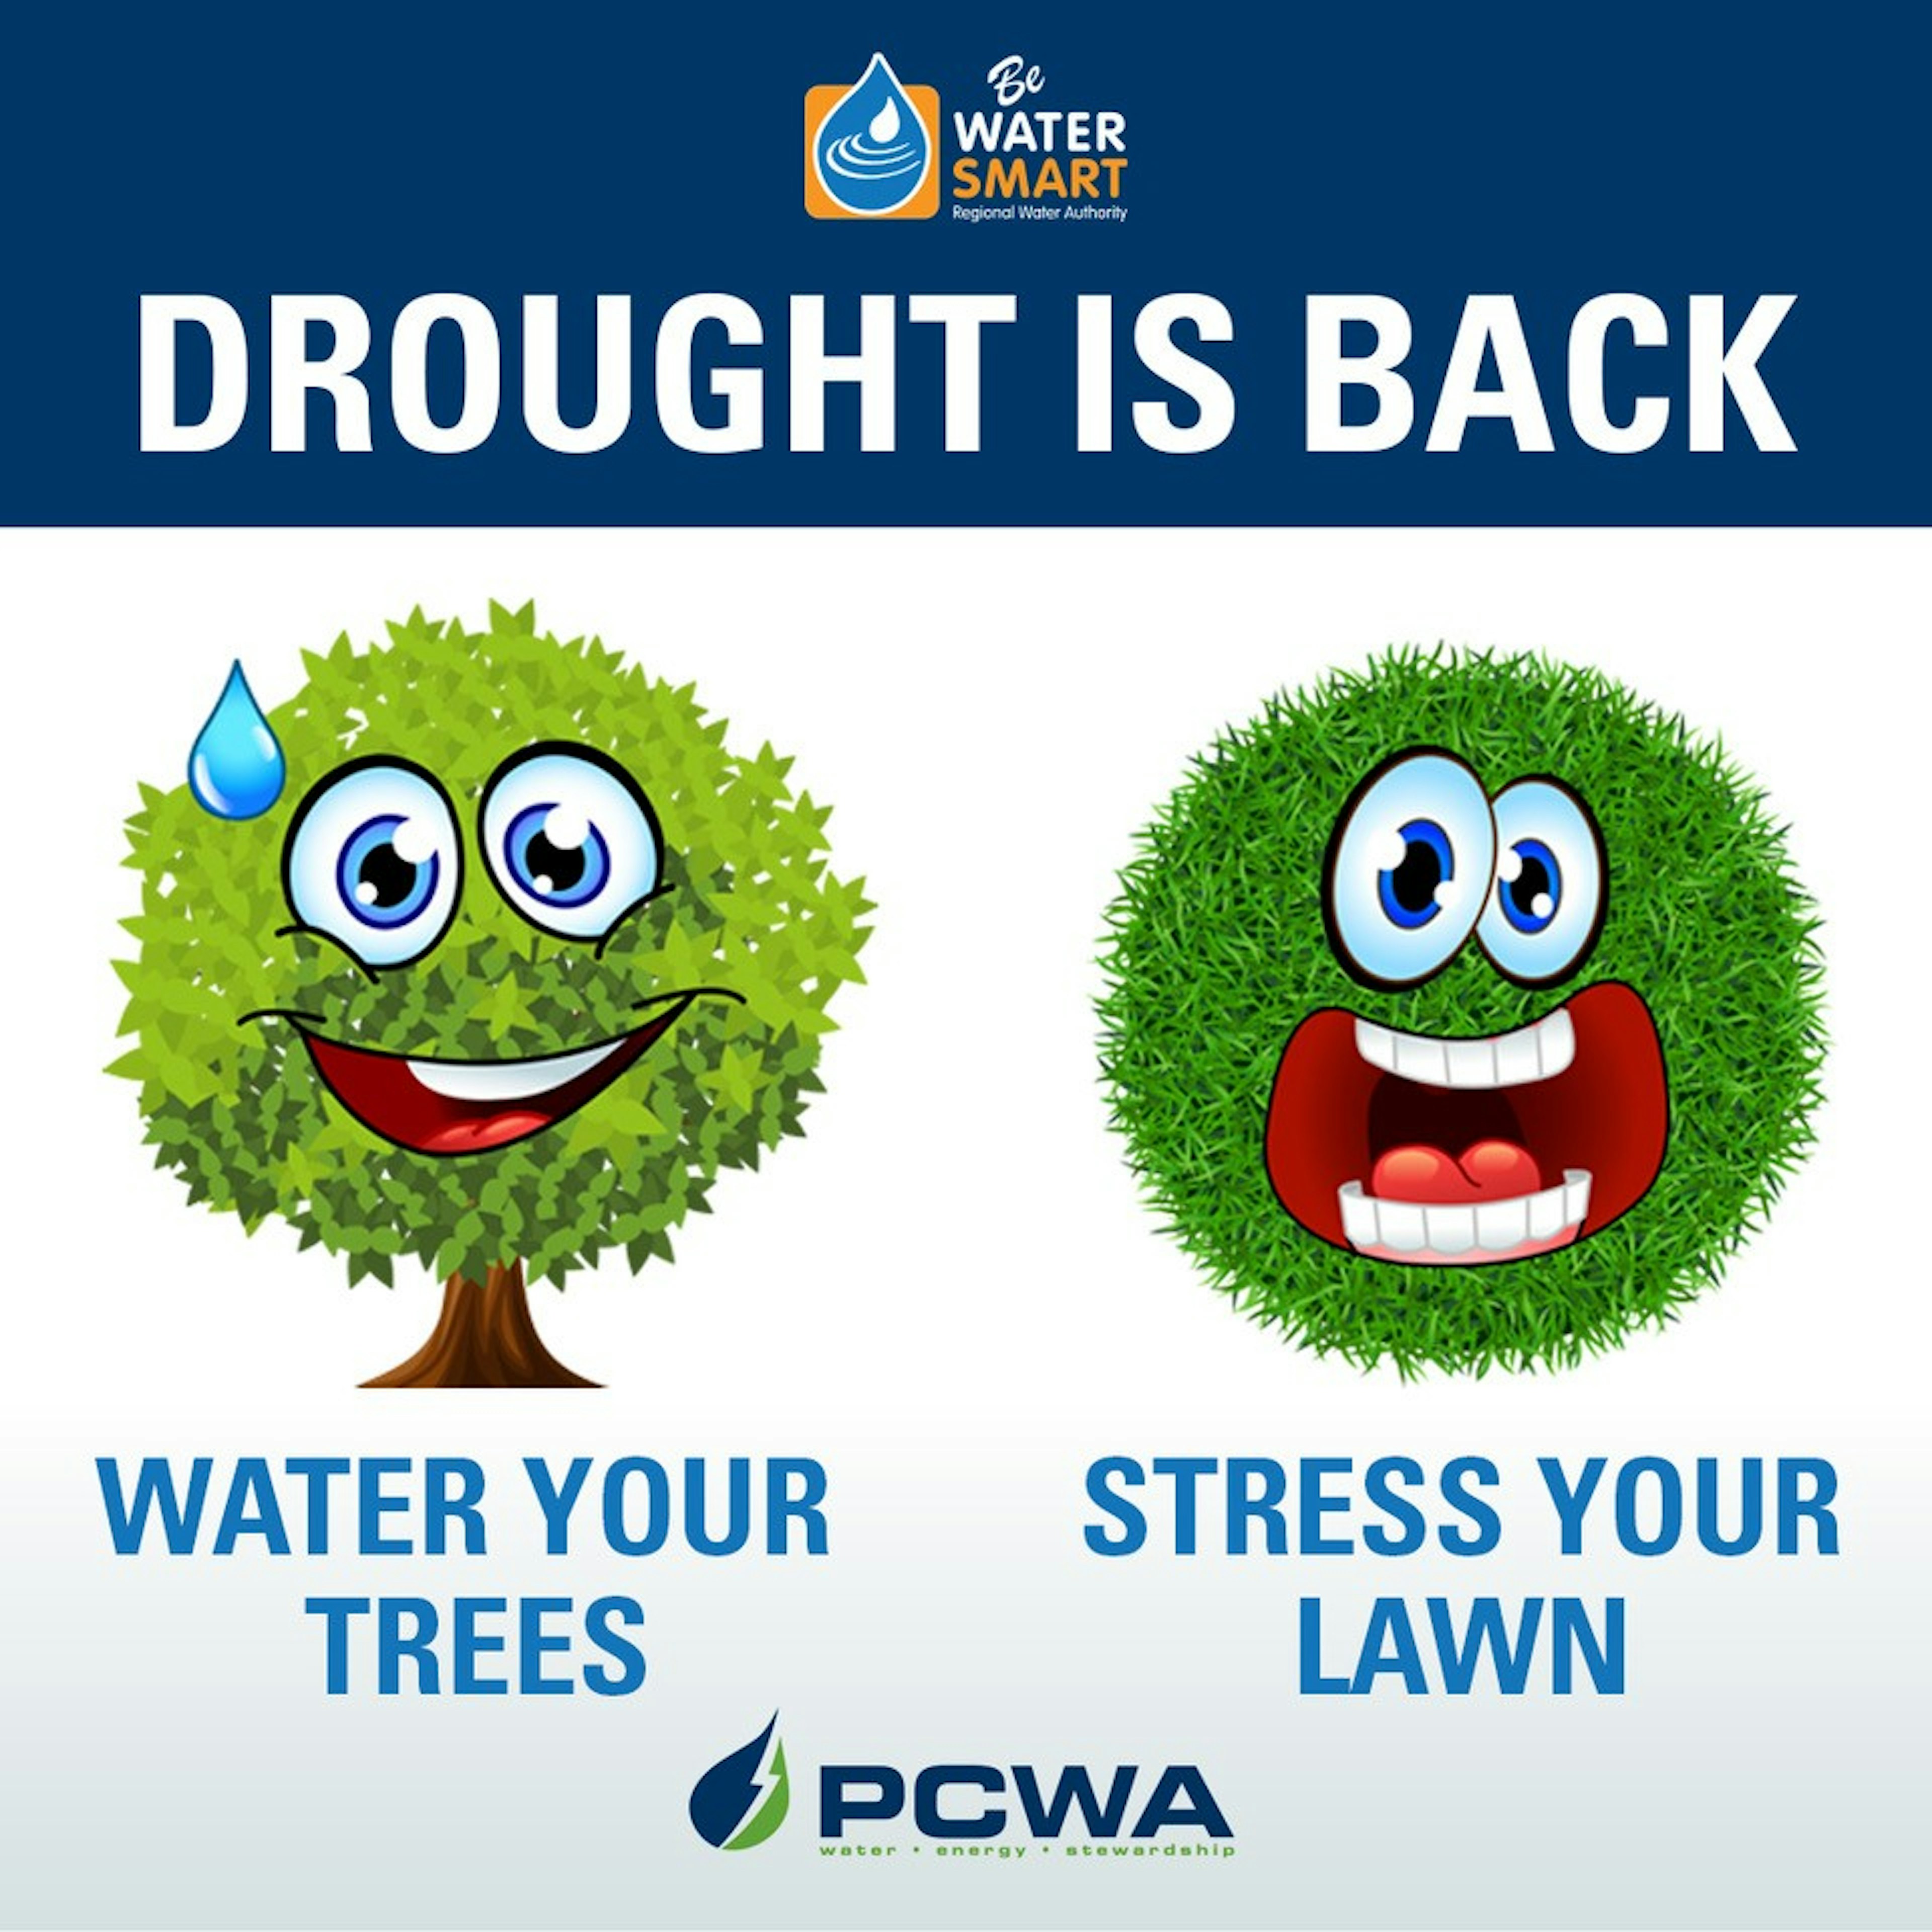 Drought is back, water your trees, stress your lawn